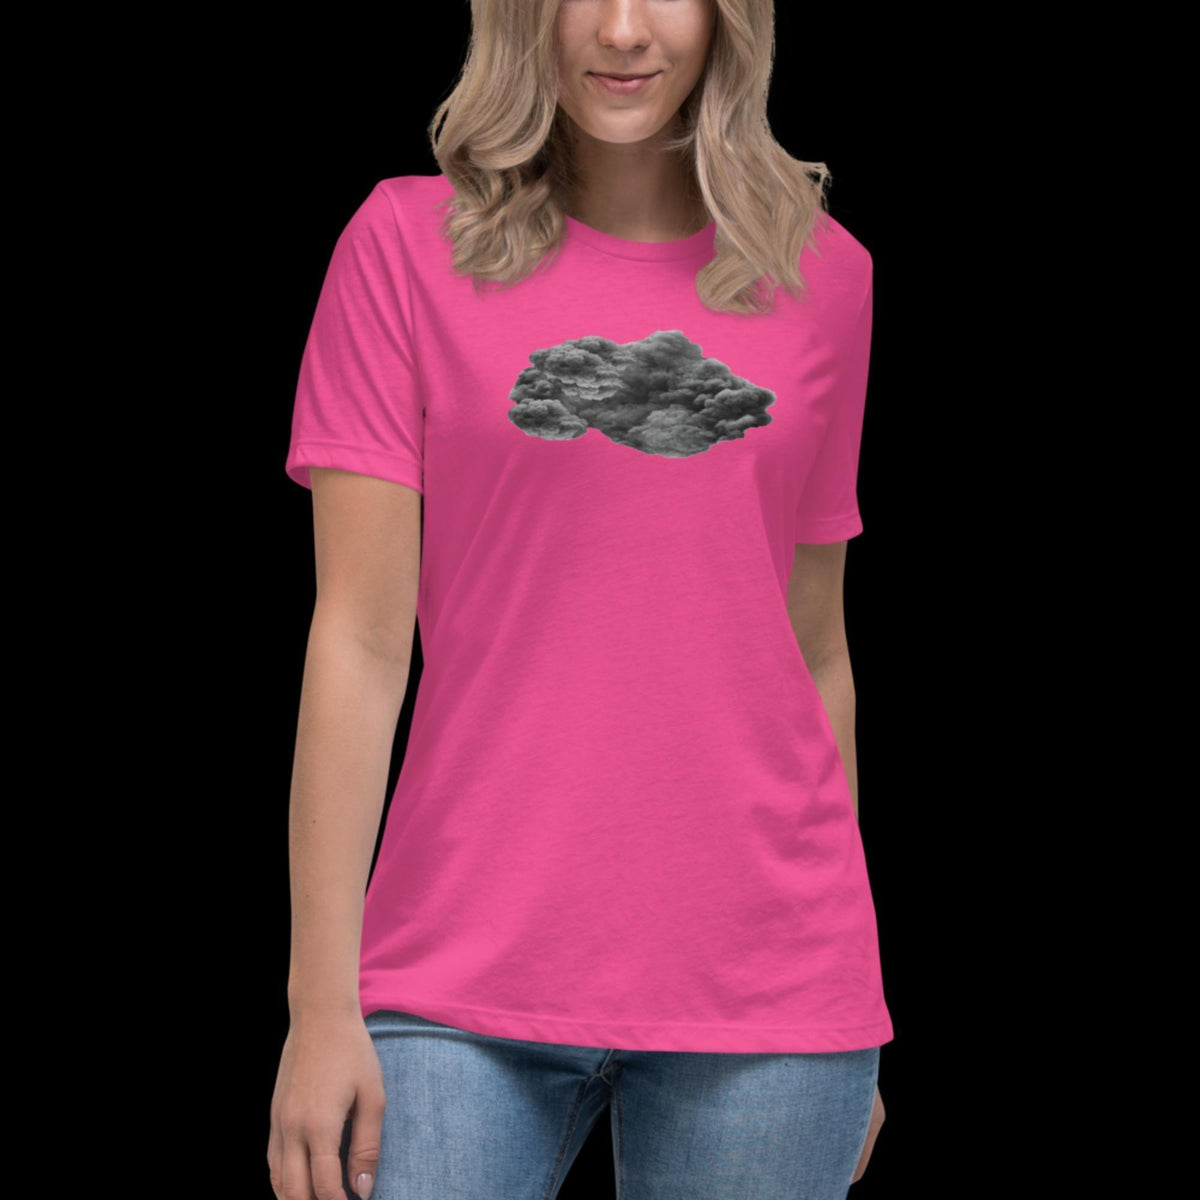 Black Cloud Women's Relaxed T-Shirt - Salty Medic Clothing Co.